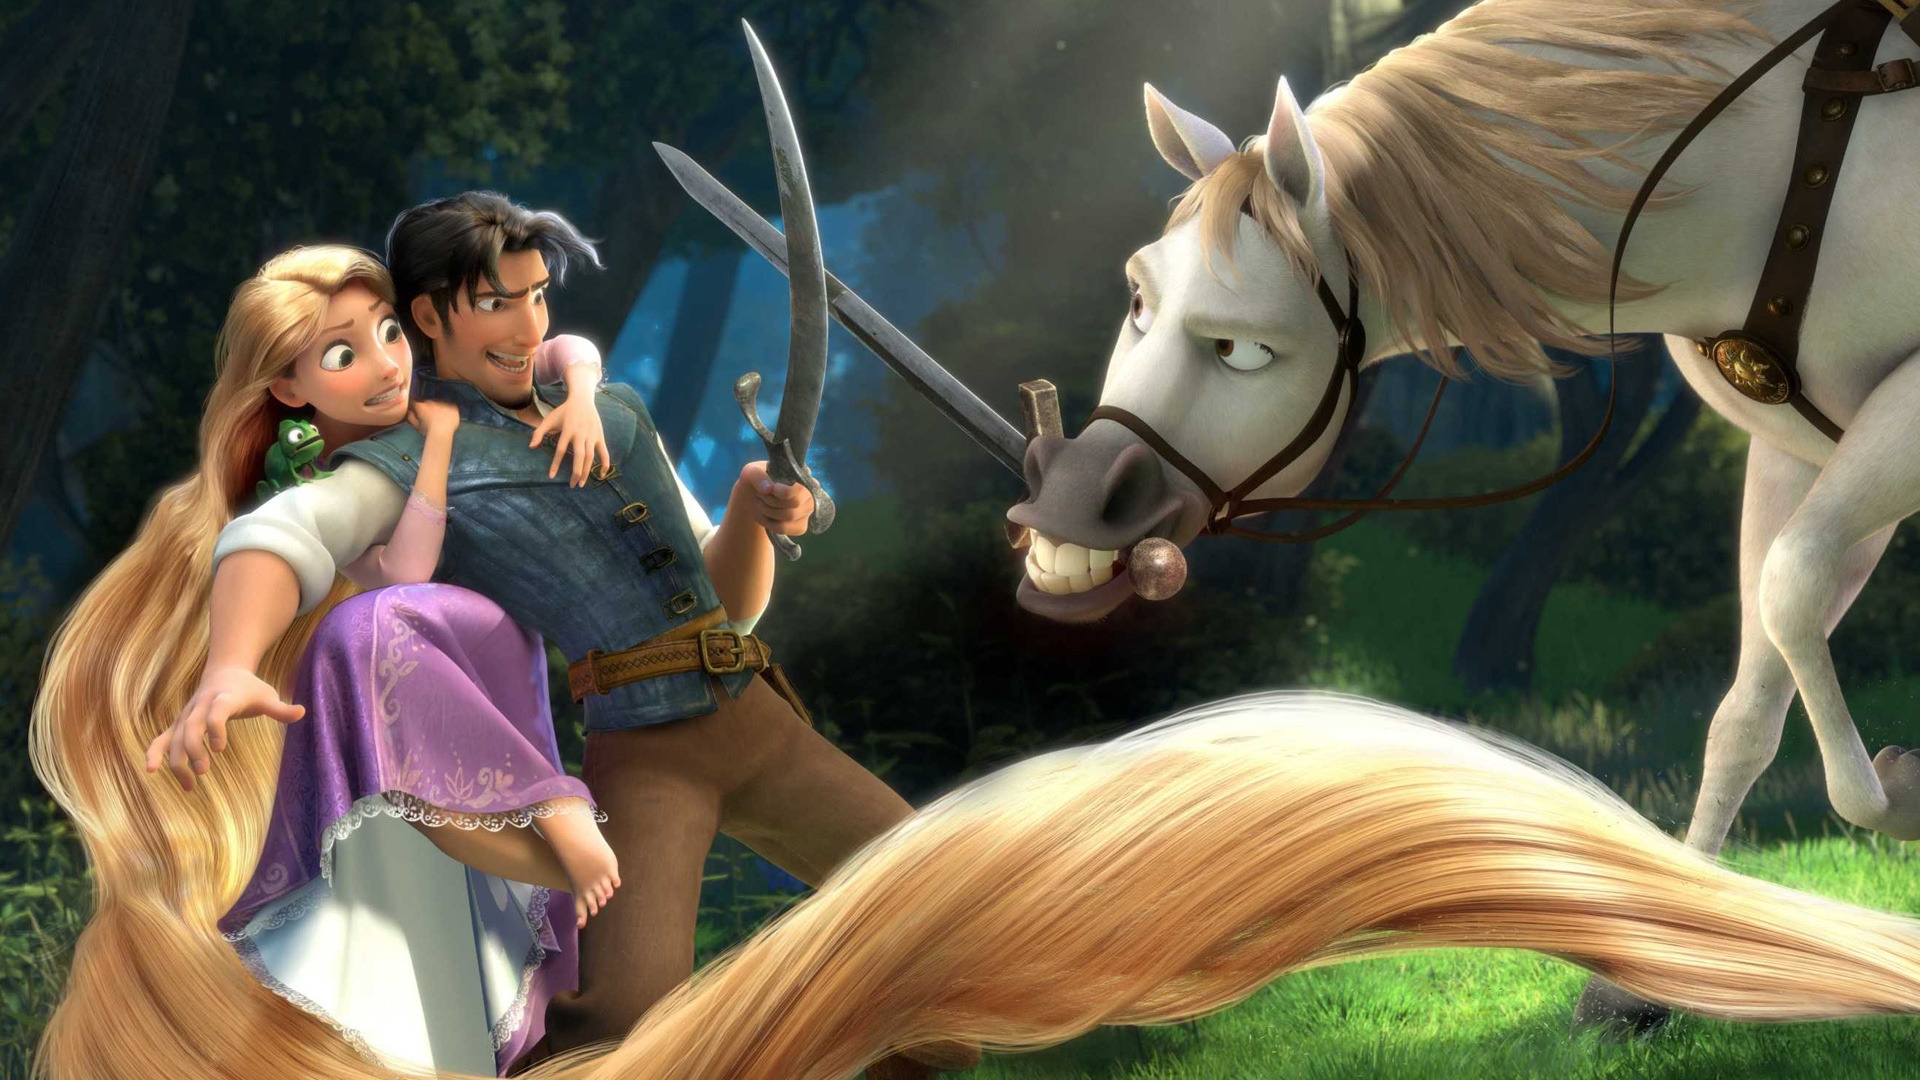 Tangled Movie for 1920 x 1080 HDTV 1080p resolution